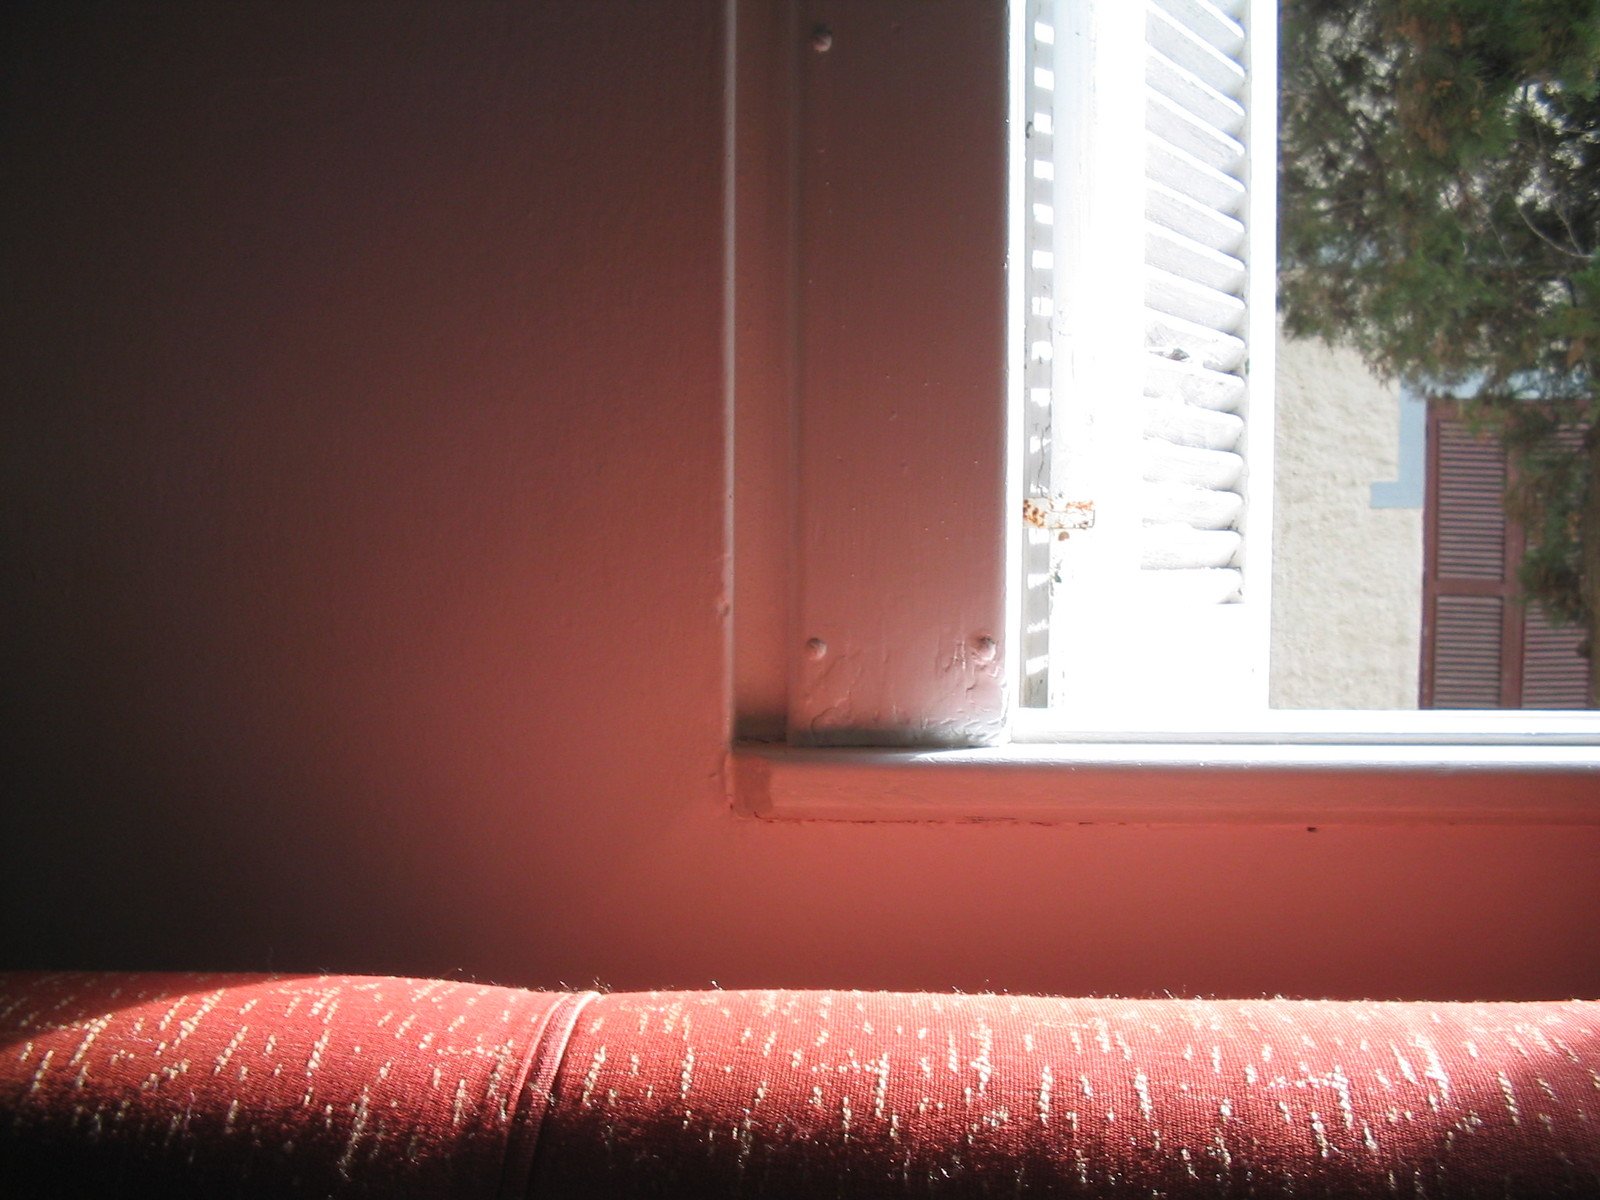 a red bench sits in a room with a window